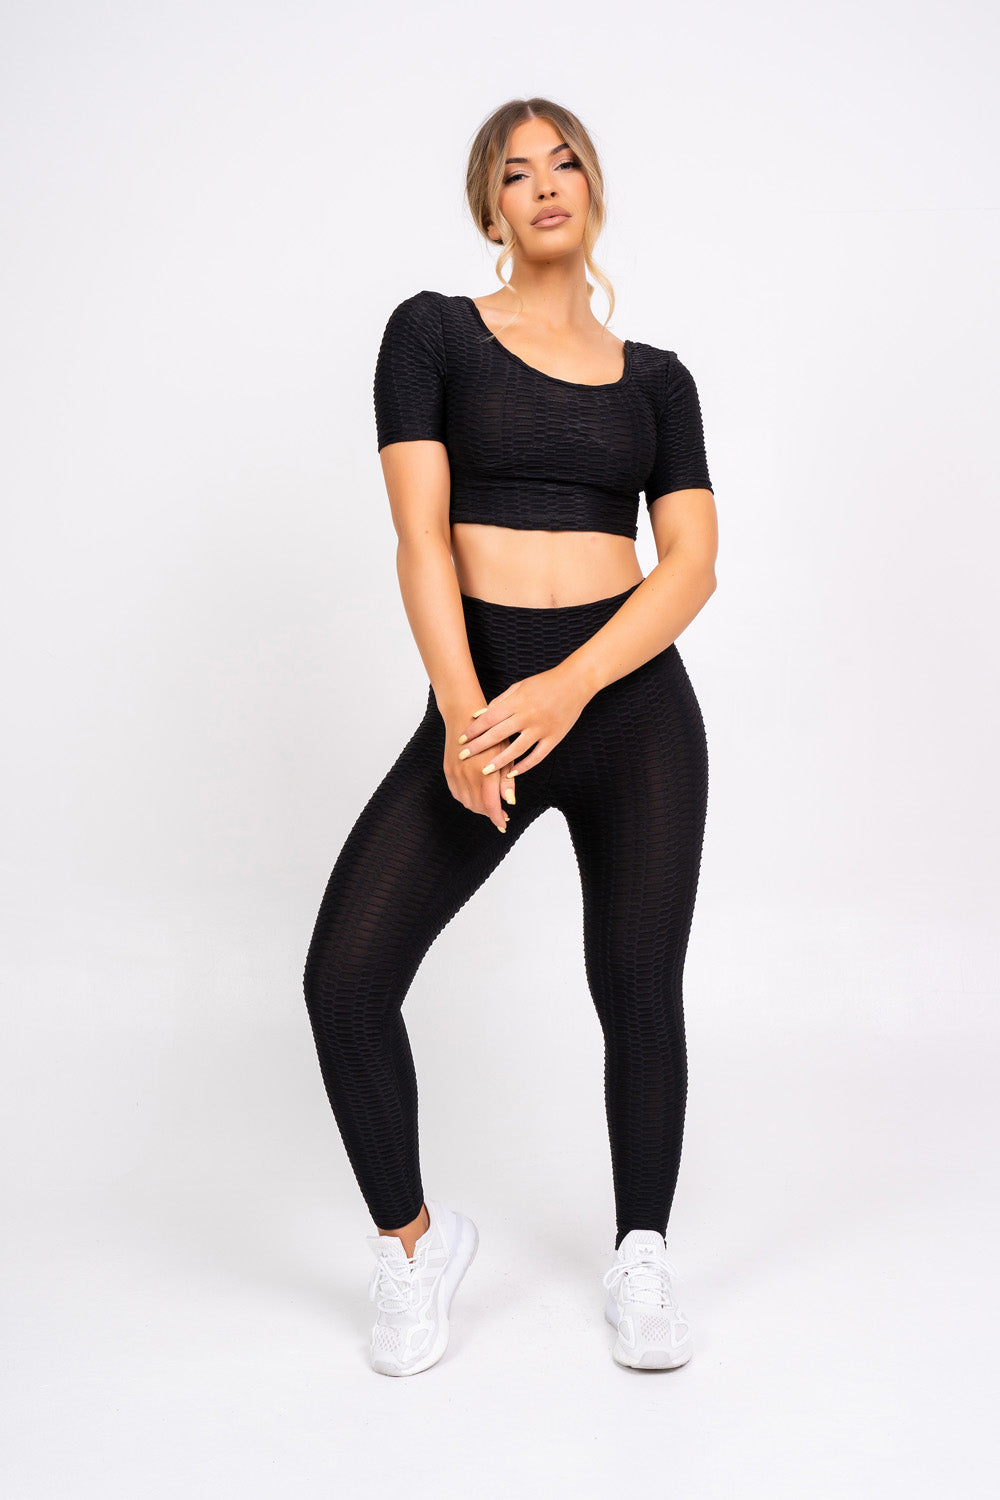 Dion Black Honeycomb Sports Cropped Top & leggings Co-ord Fitness Set